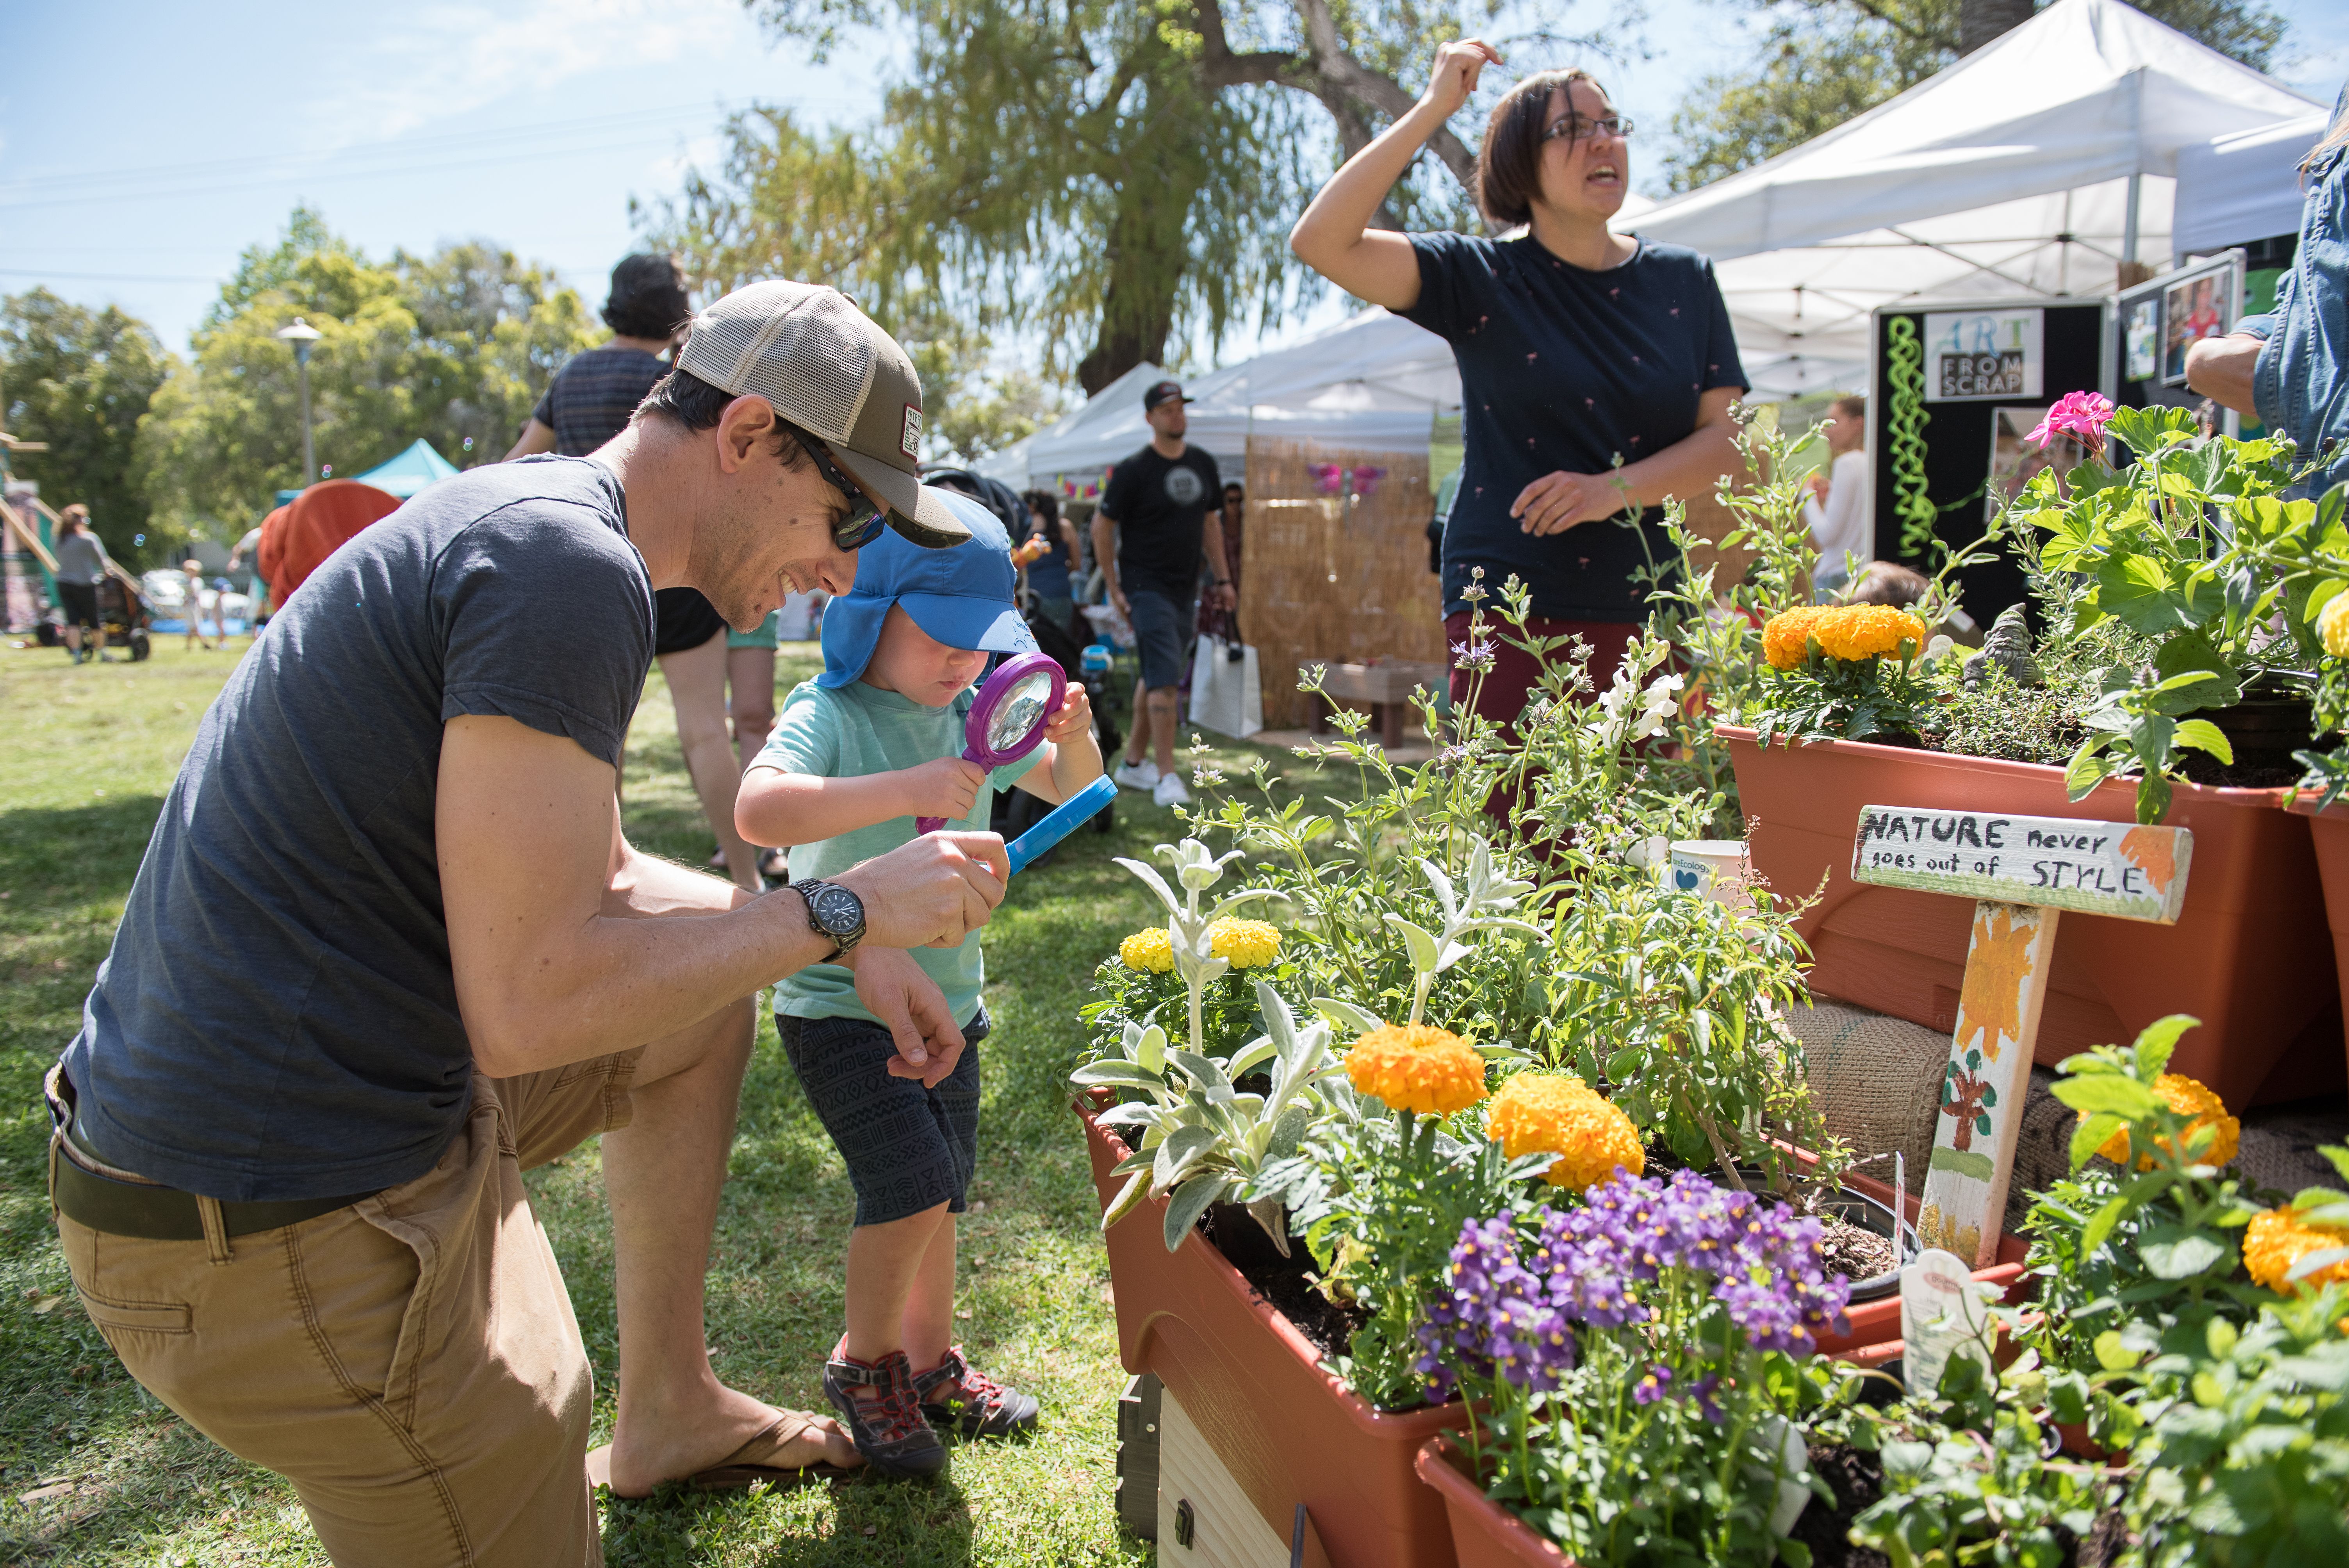 A young father and a toddler looking at green plants and flowers at Santa Barbara Earth Day festivities.